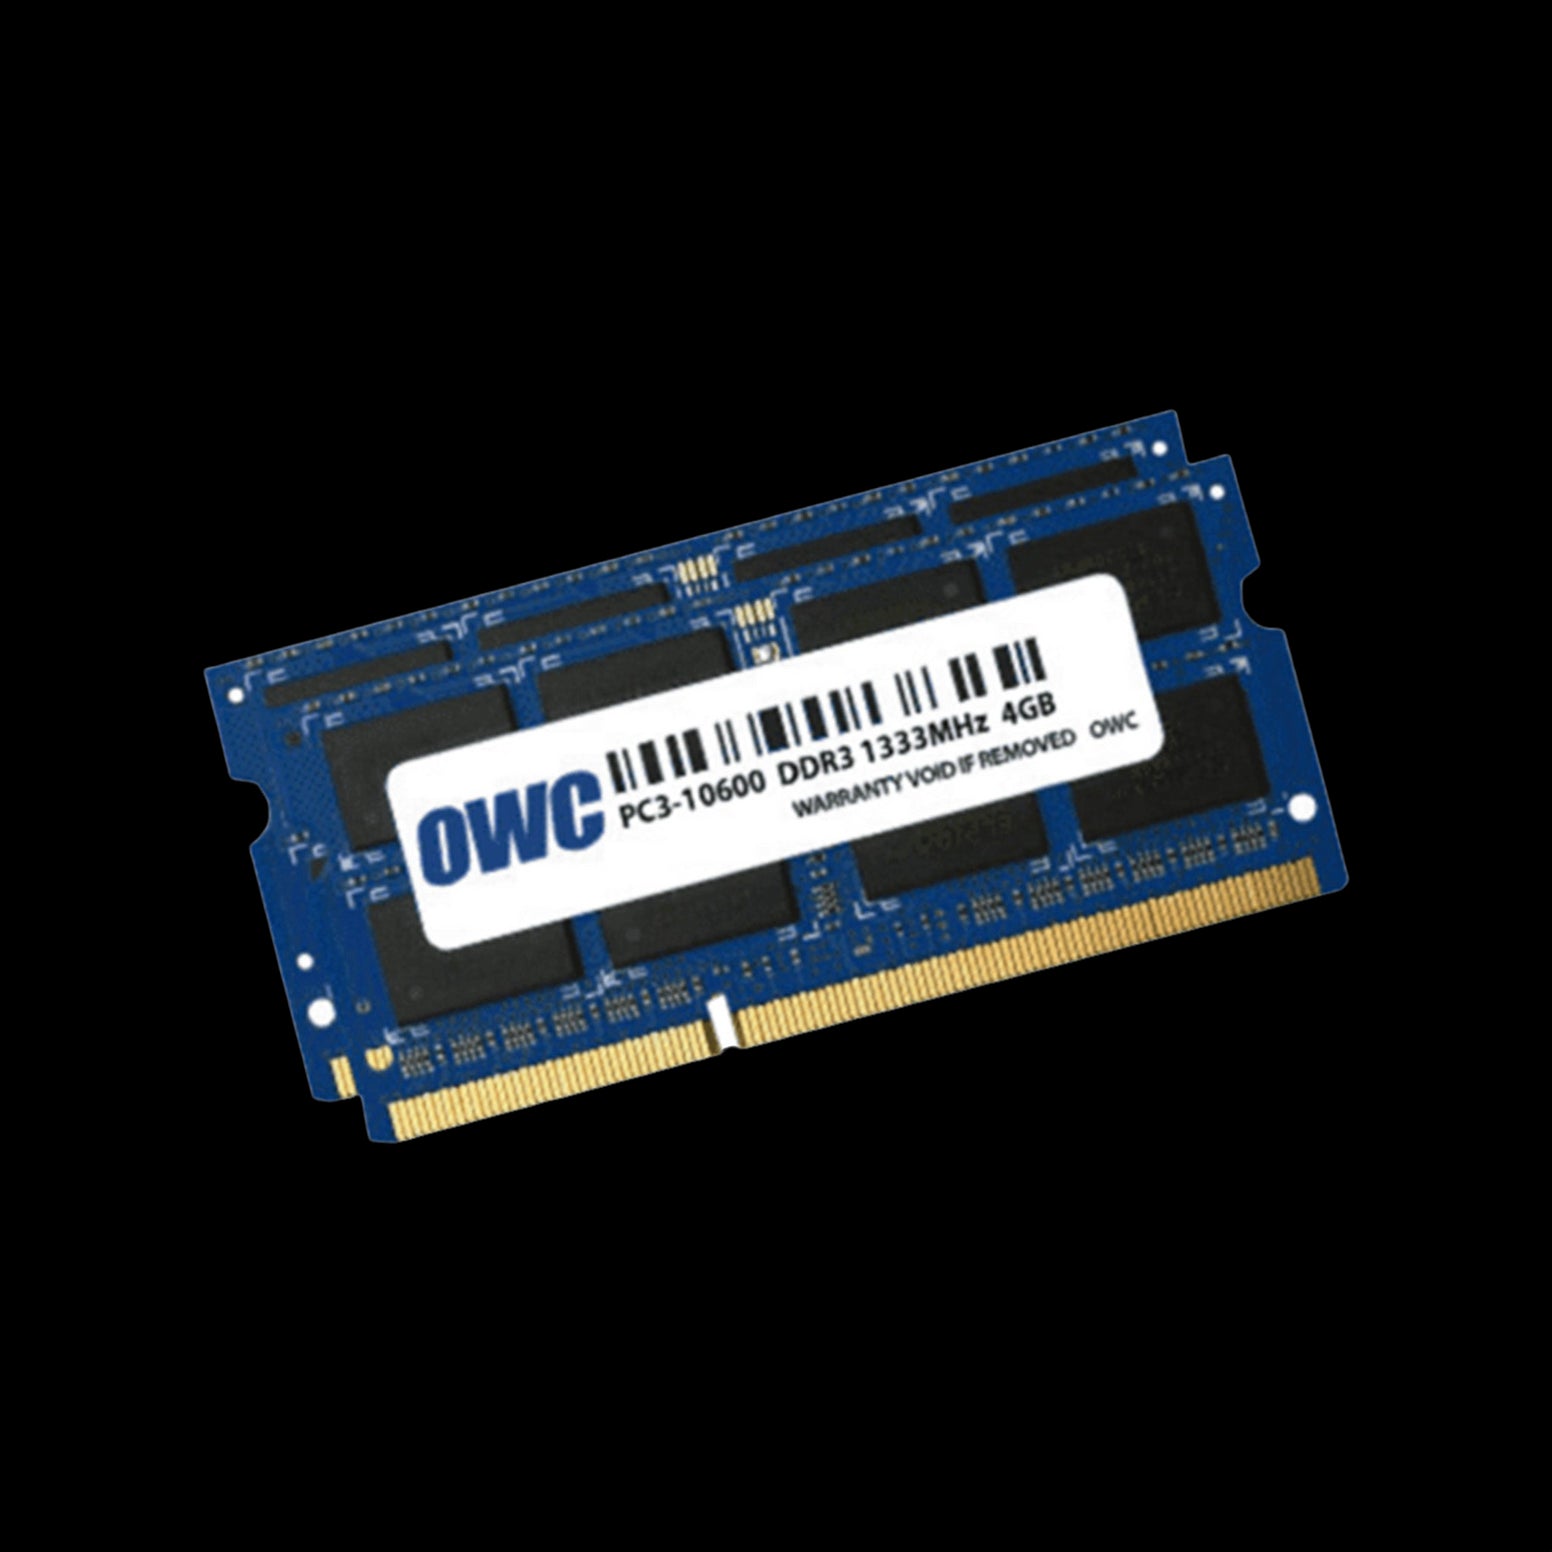 64GB OWC Matched Memory Upgrade Kit (2 x 32GB) 22666MHZ PC4-21300 DDR4 SO-DIMM with Tools and Adhesive Strips (for 2019 iMac 21.5") - Discontinued